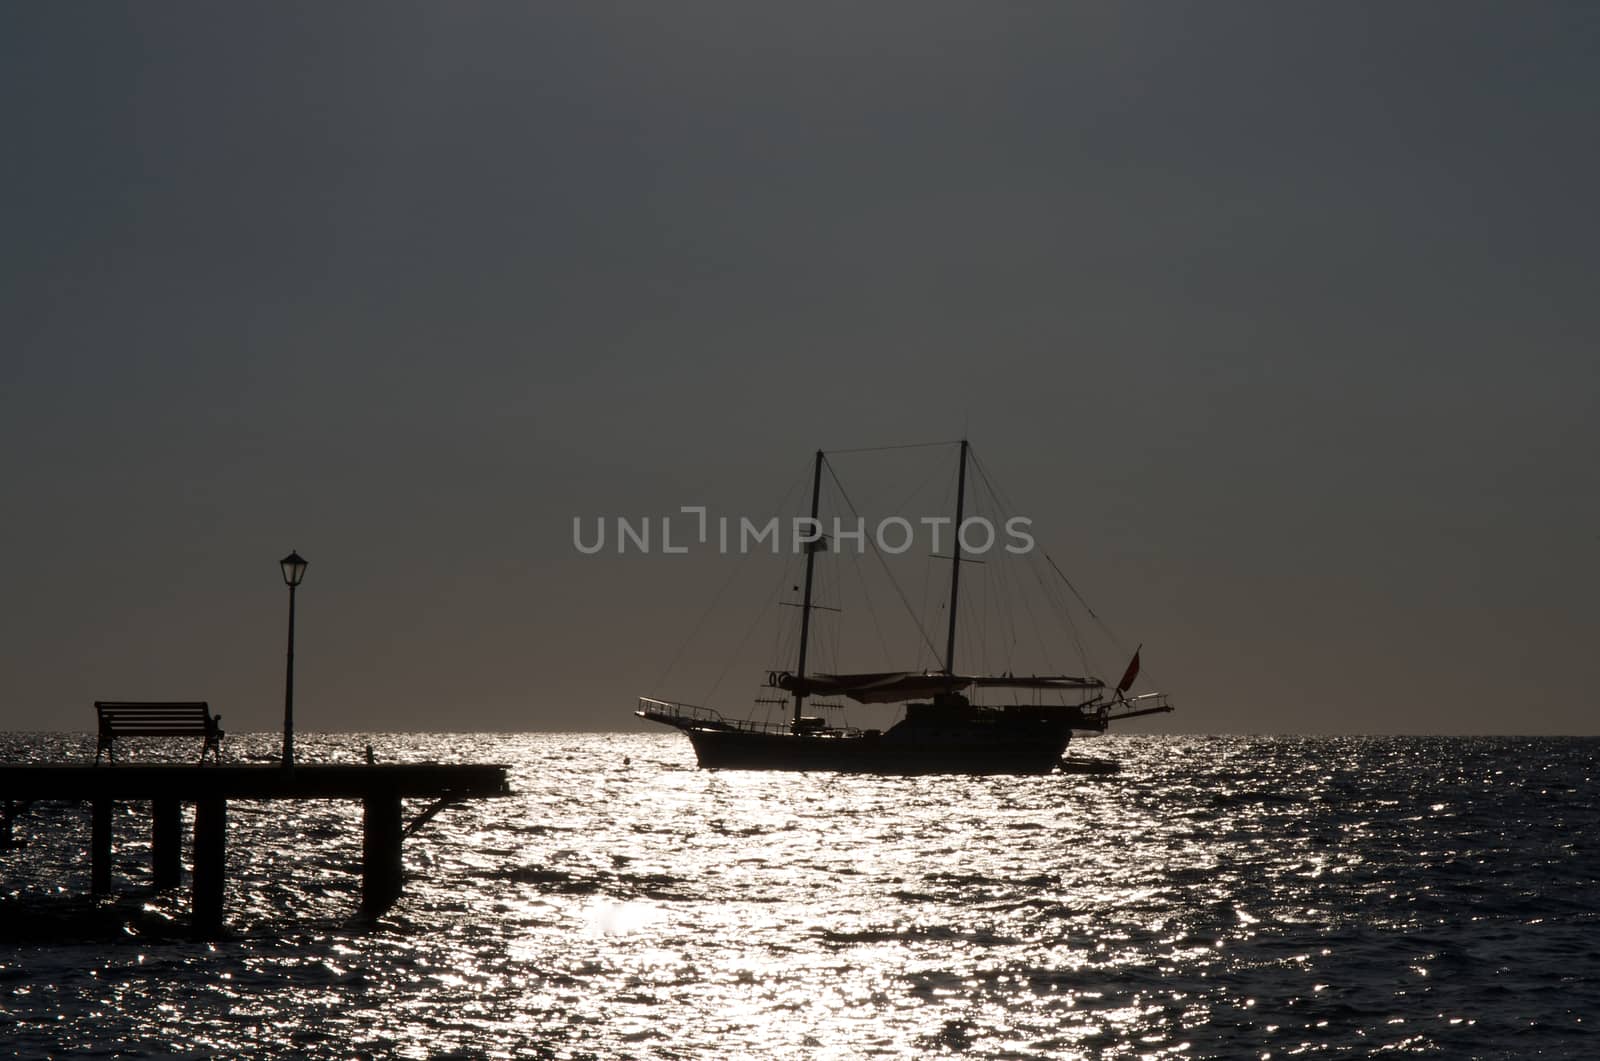 Seascape with Sailing Ship and Pier with Street Lamp Early Morning on Sunrise Sea background Outdoors